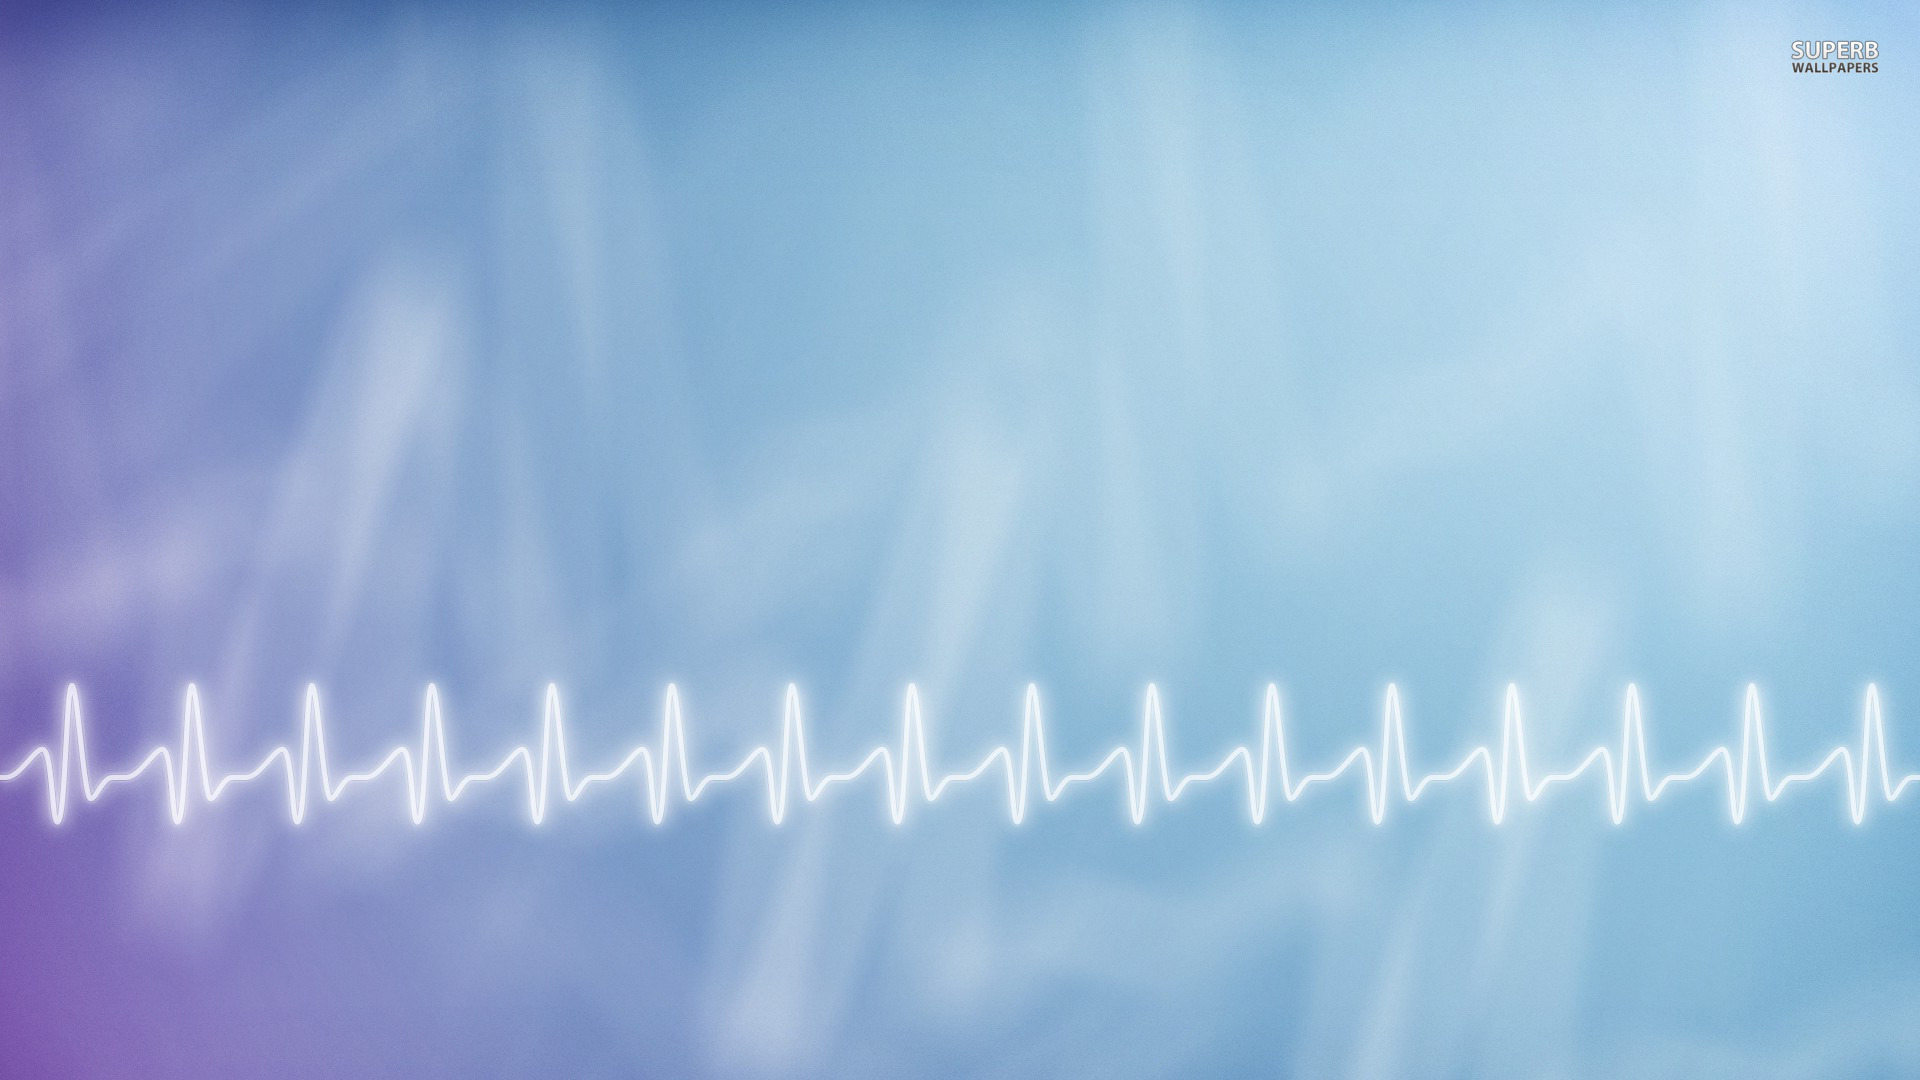 Abstract Heartbeat 1920x1080